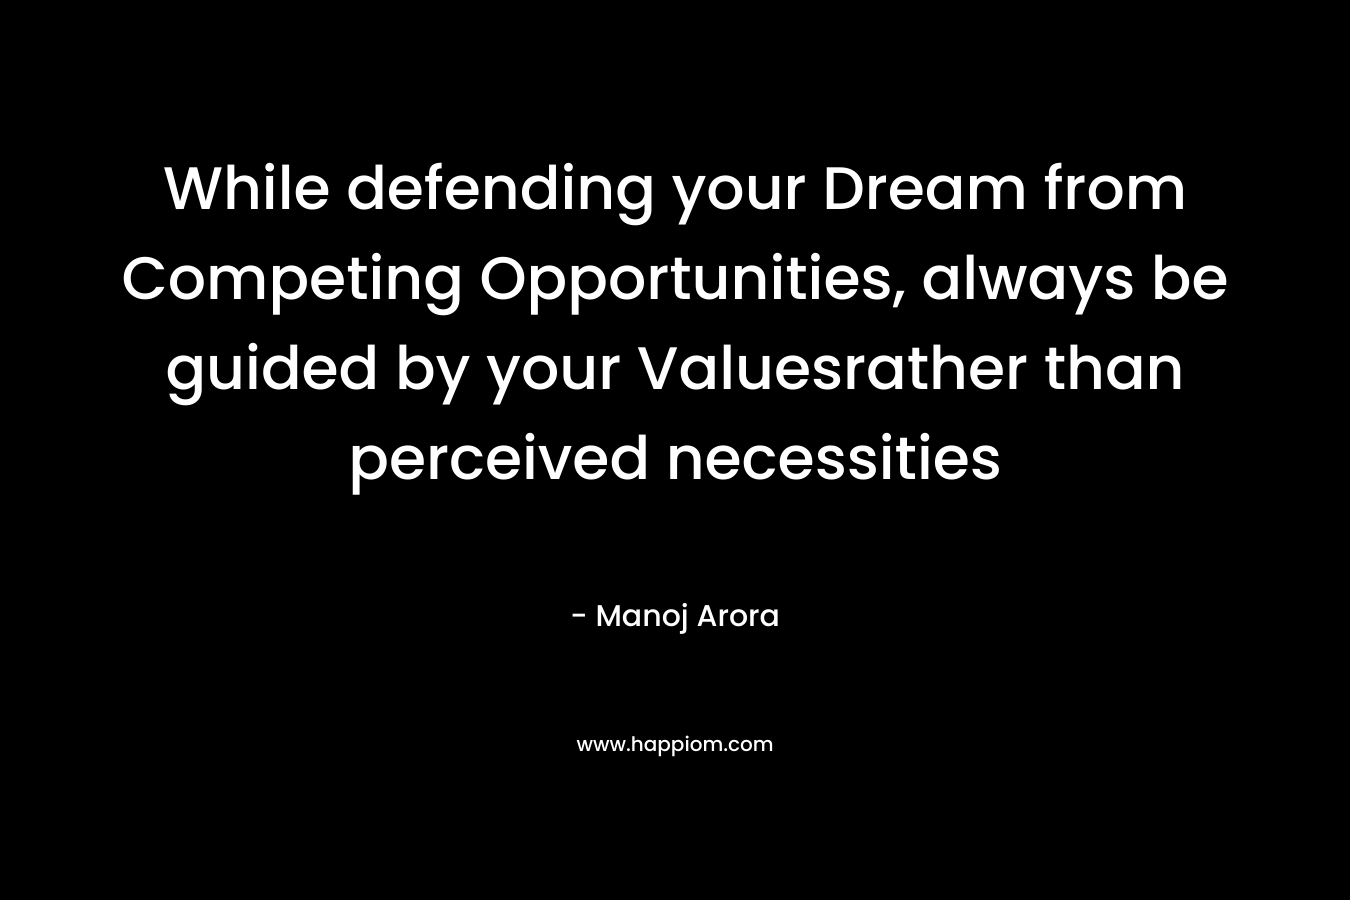 While defending your Dream from Competing Opportunities, always be guided by your Valuesrather than perceived necessities